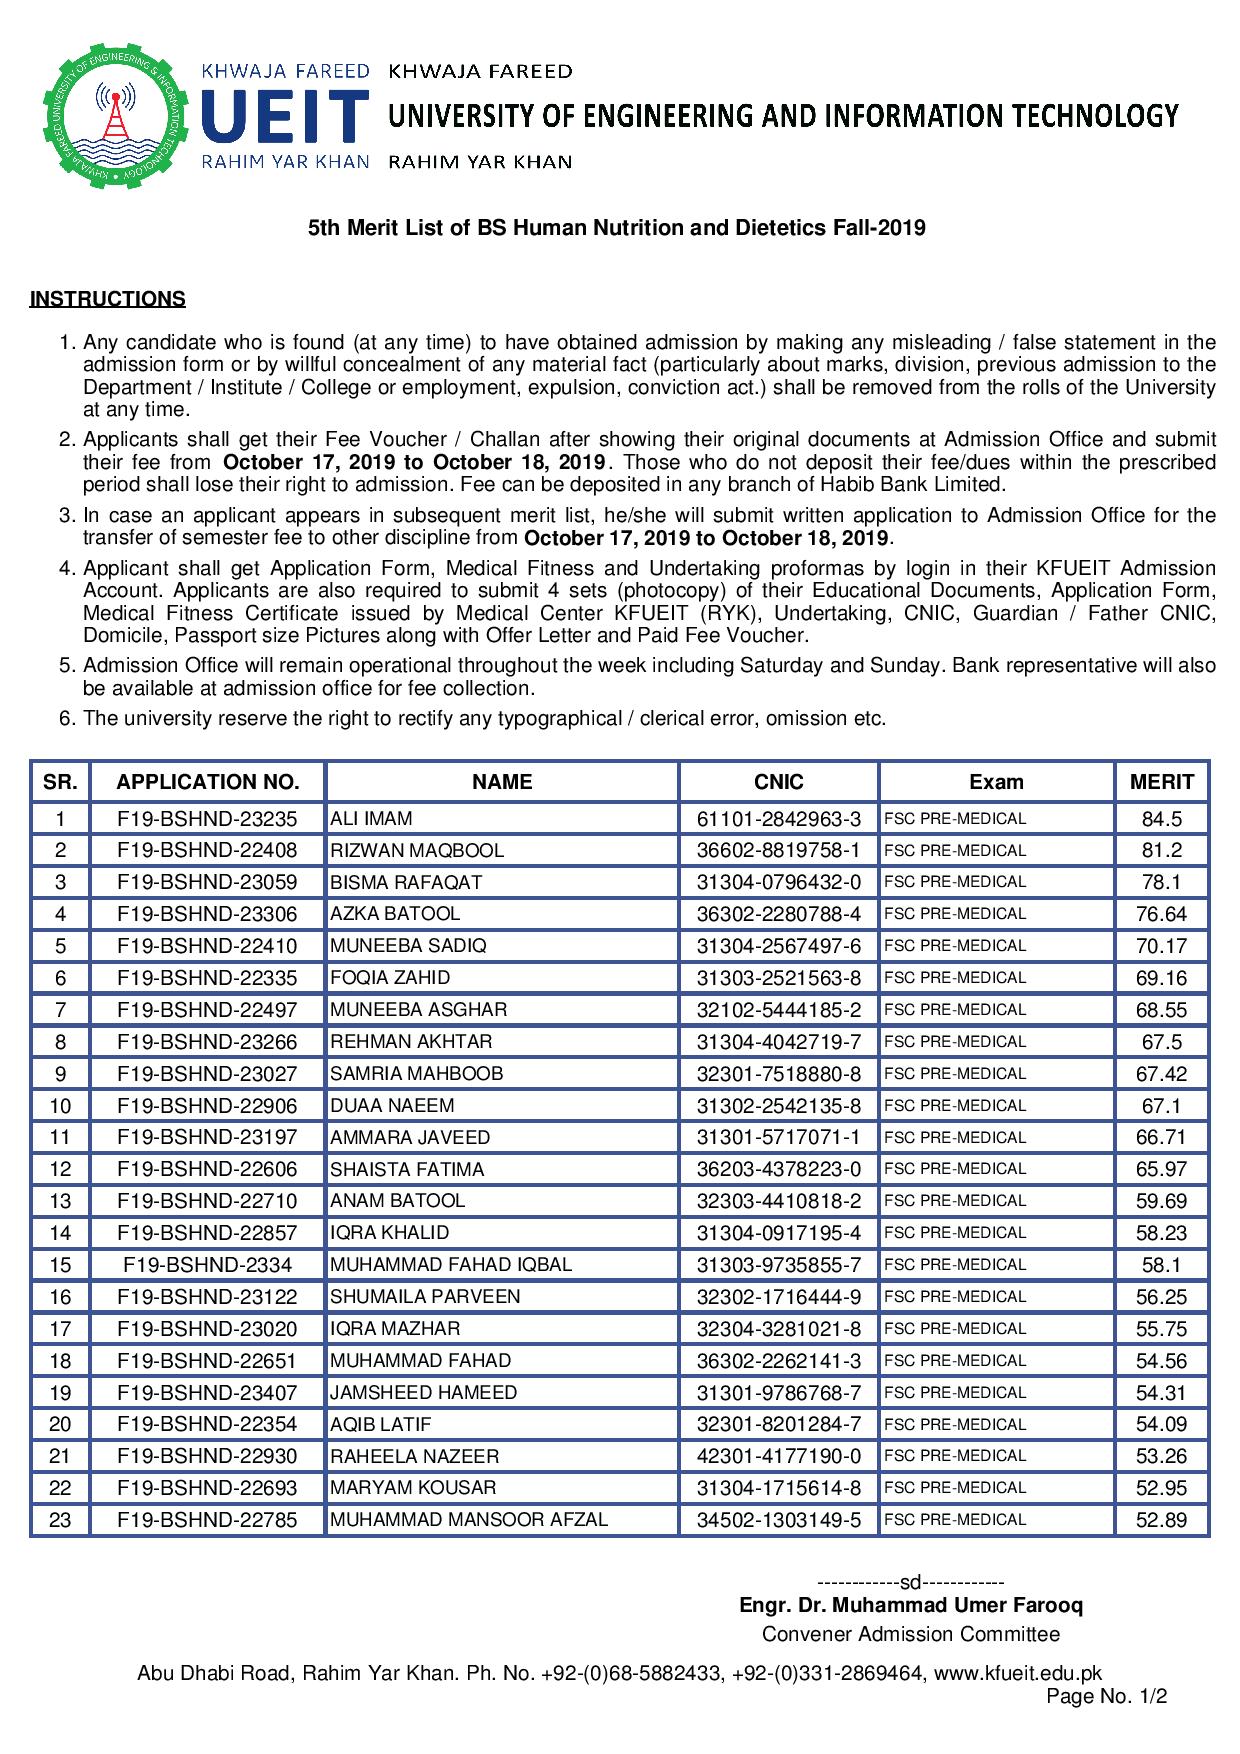 5th Merit List of BS Human Nutrition and Dietetics Fall-2019-page-001